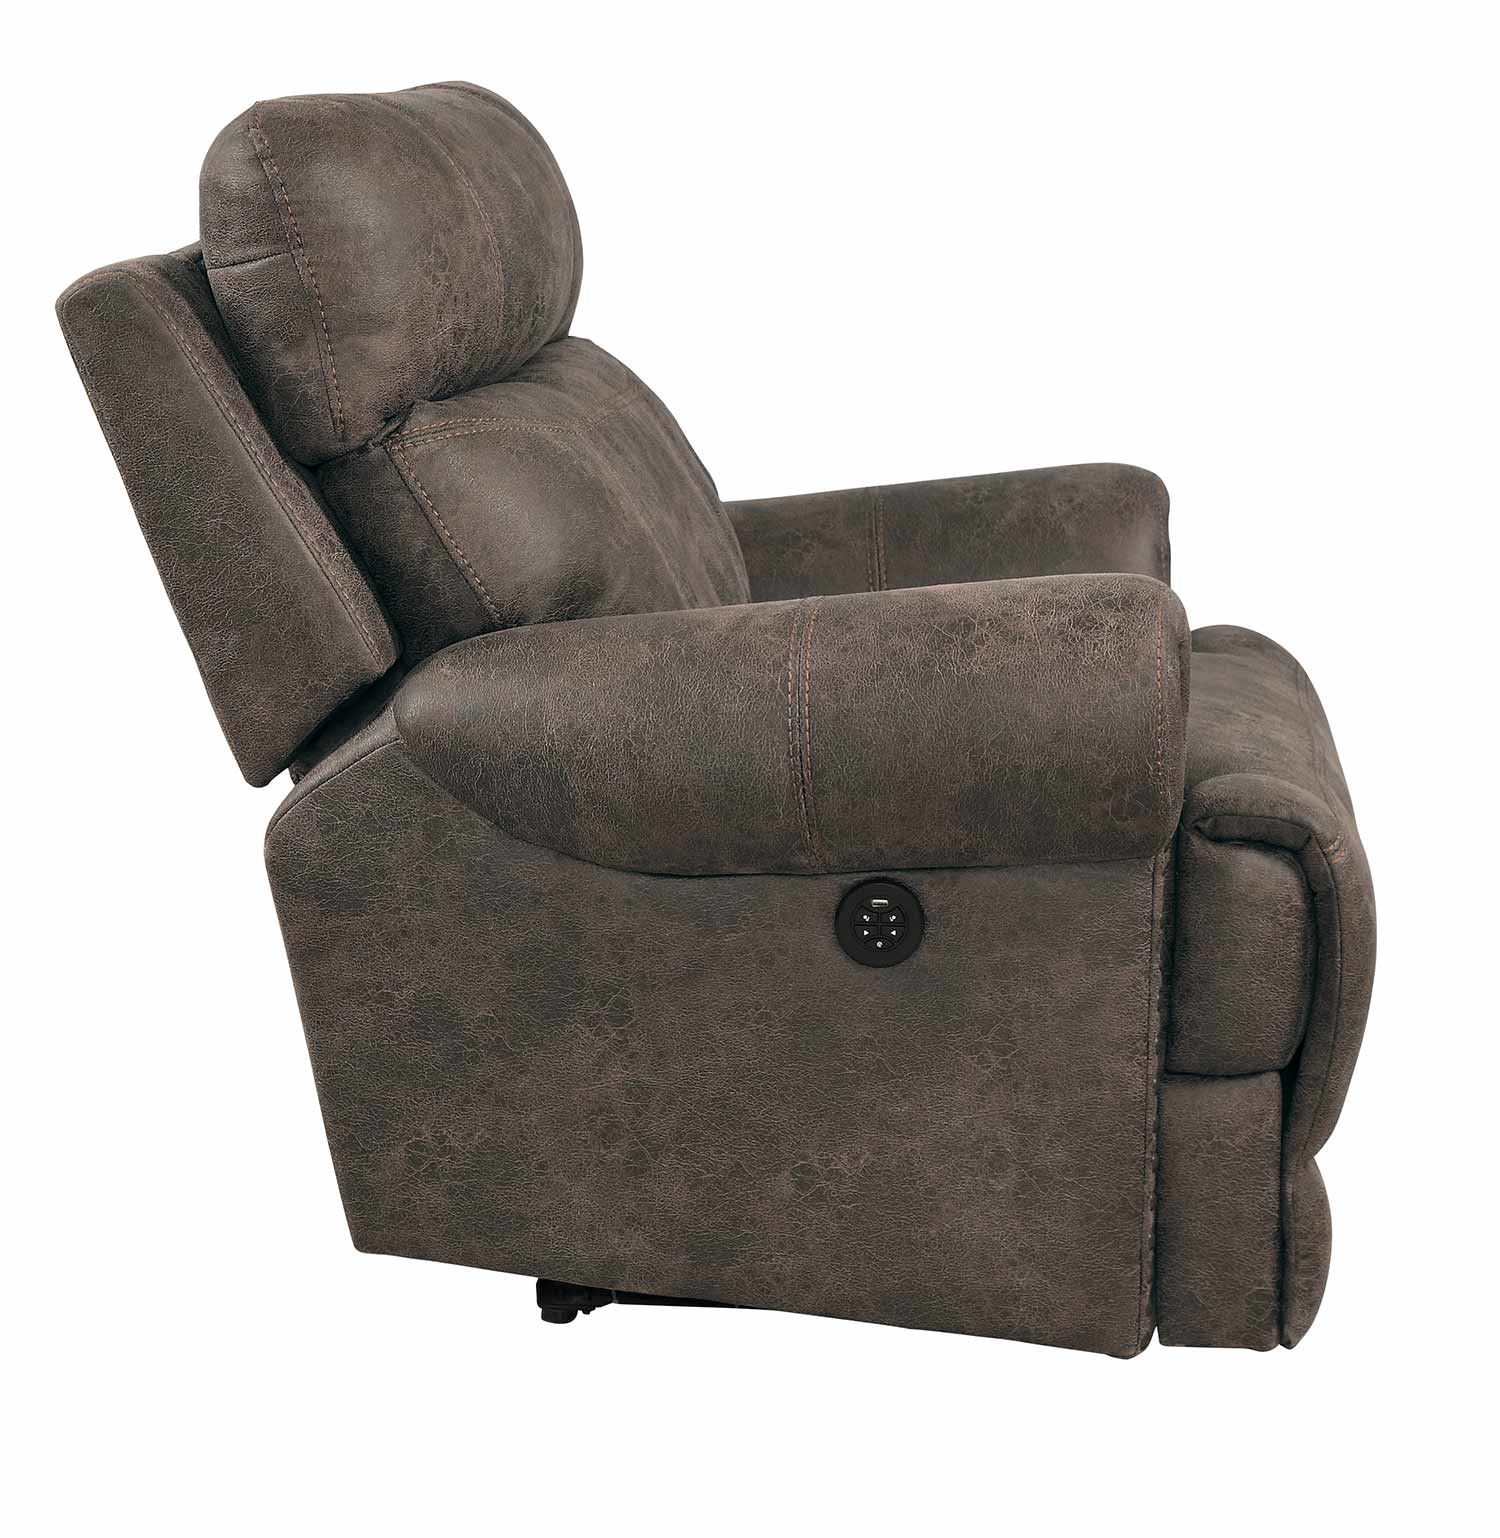 Homelegance Aggiano Power Reclining Chair With Power Headrest - Dark Brown